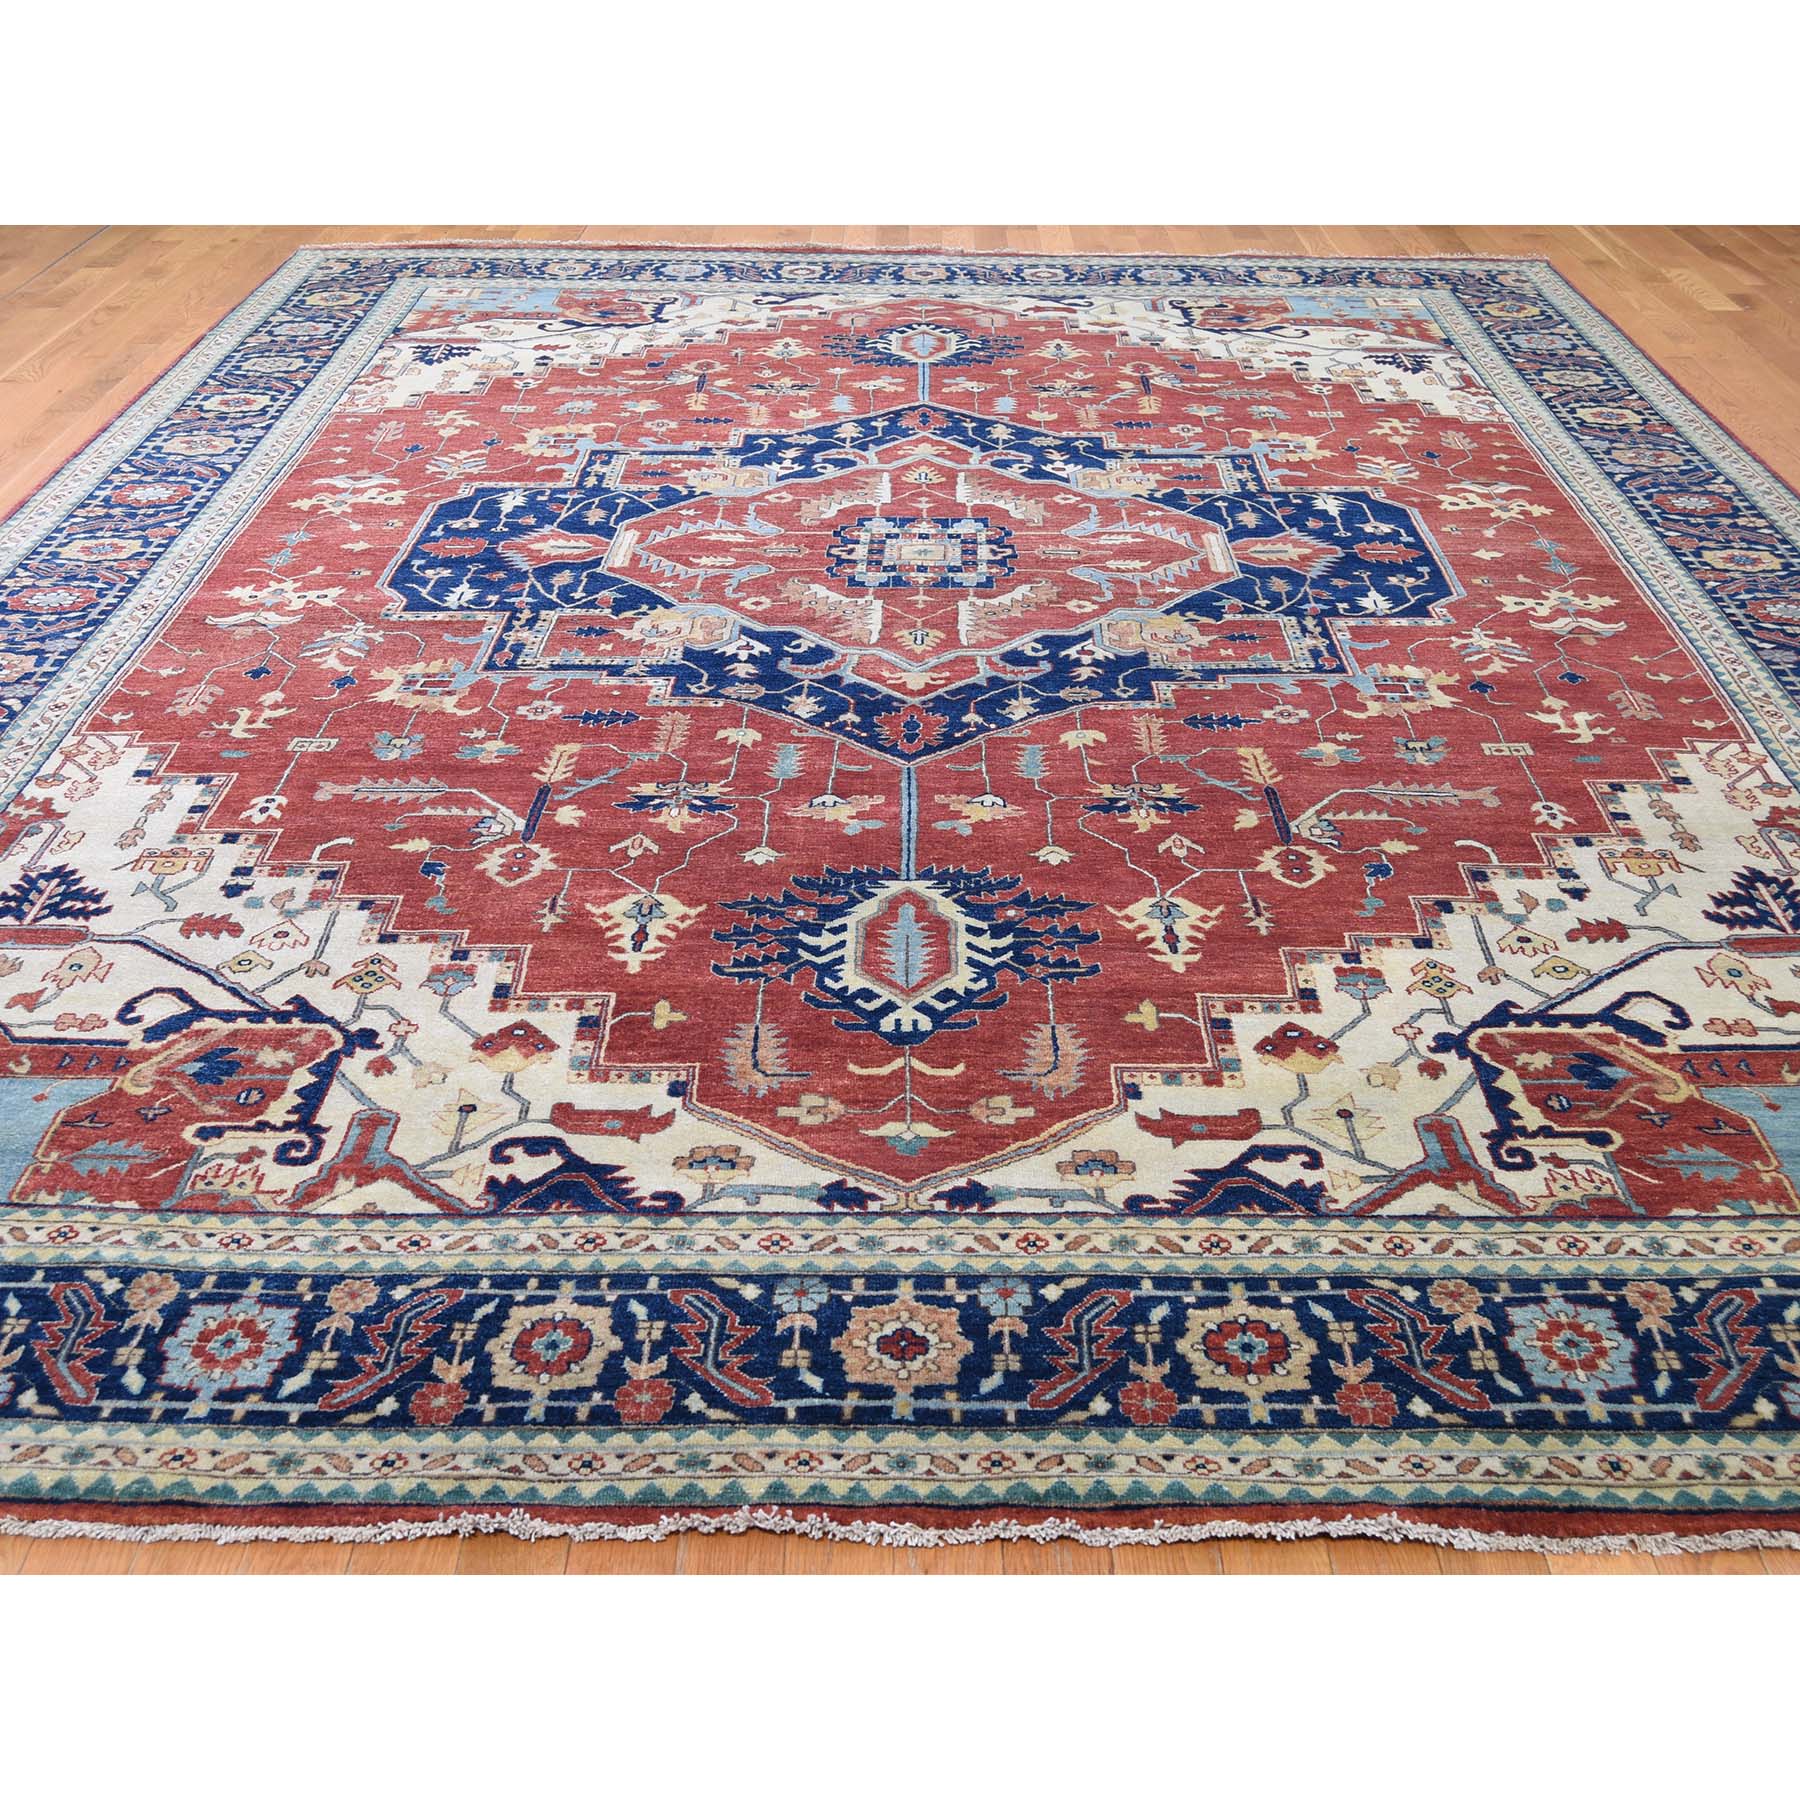 10-1 x14-2  Antiqued Heriz Re-creation Pure Wool Hand Knotted Oriental Rug 